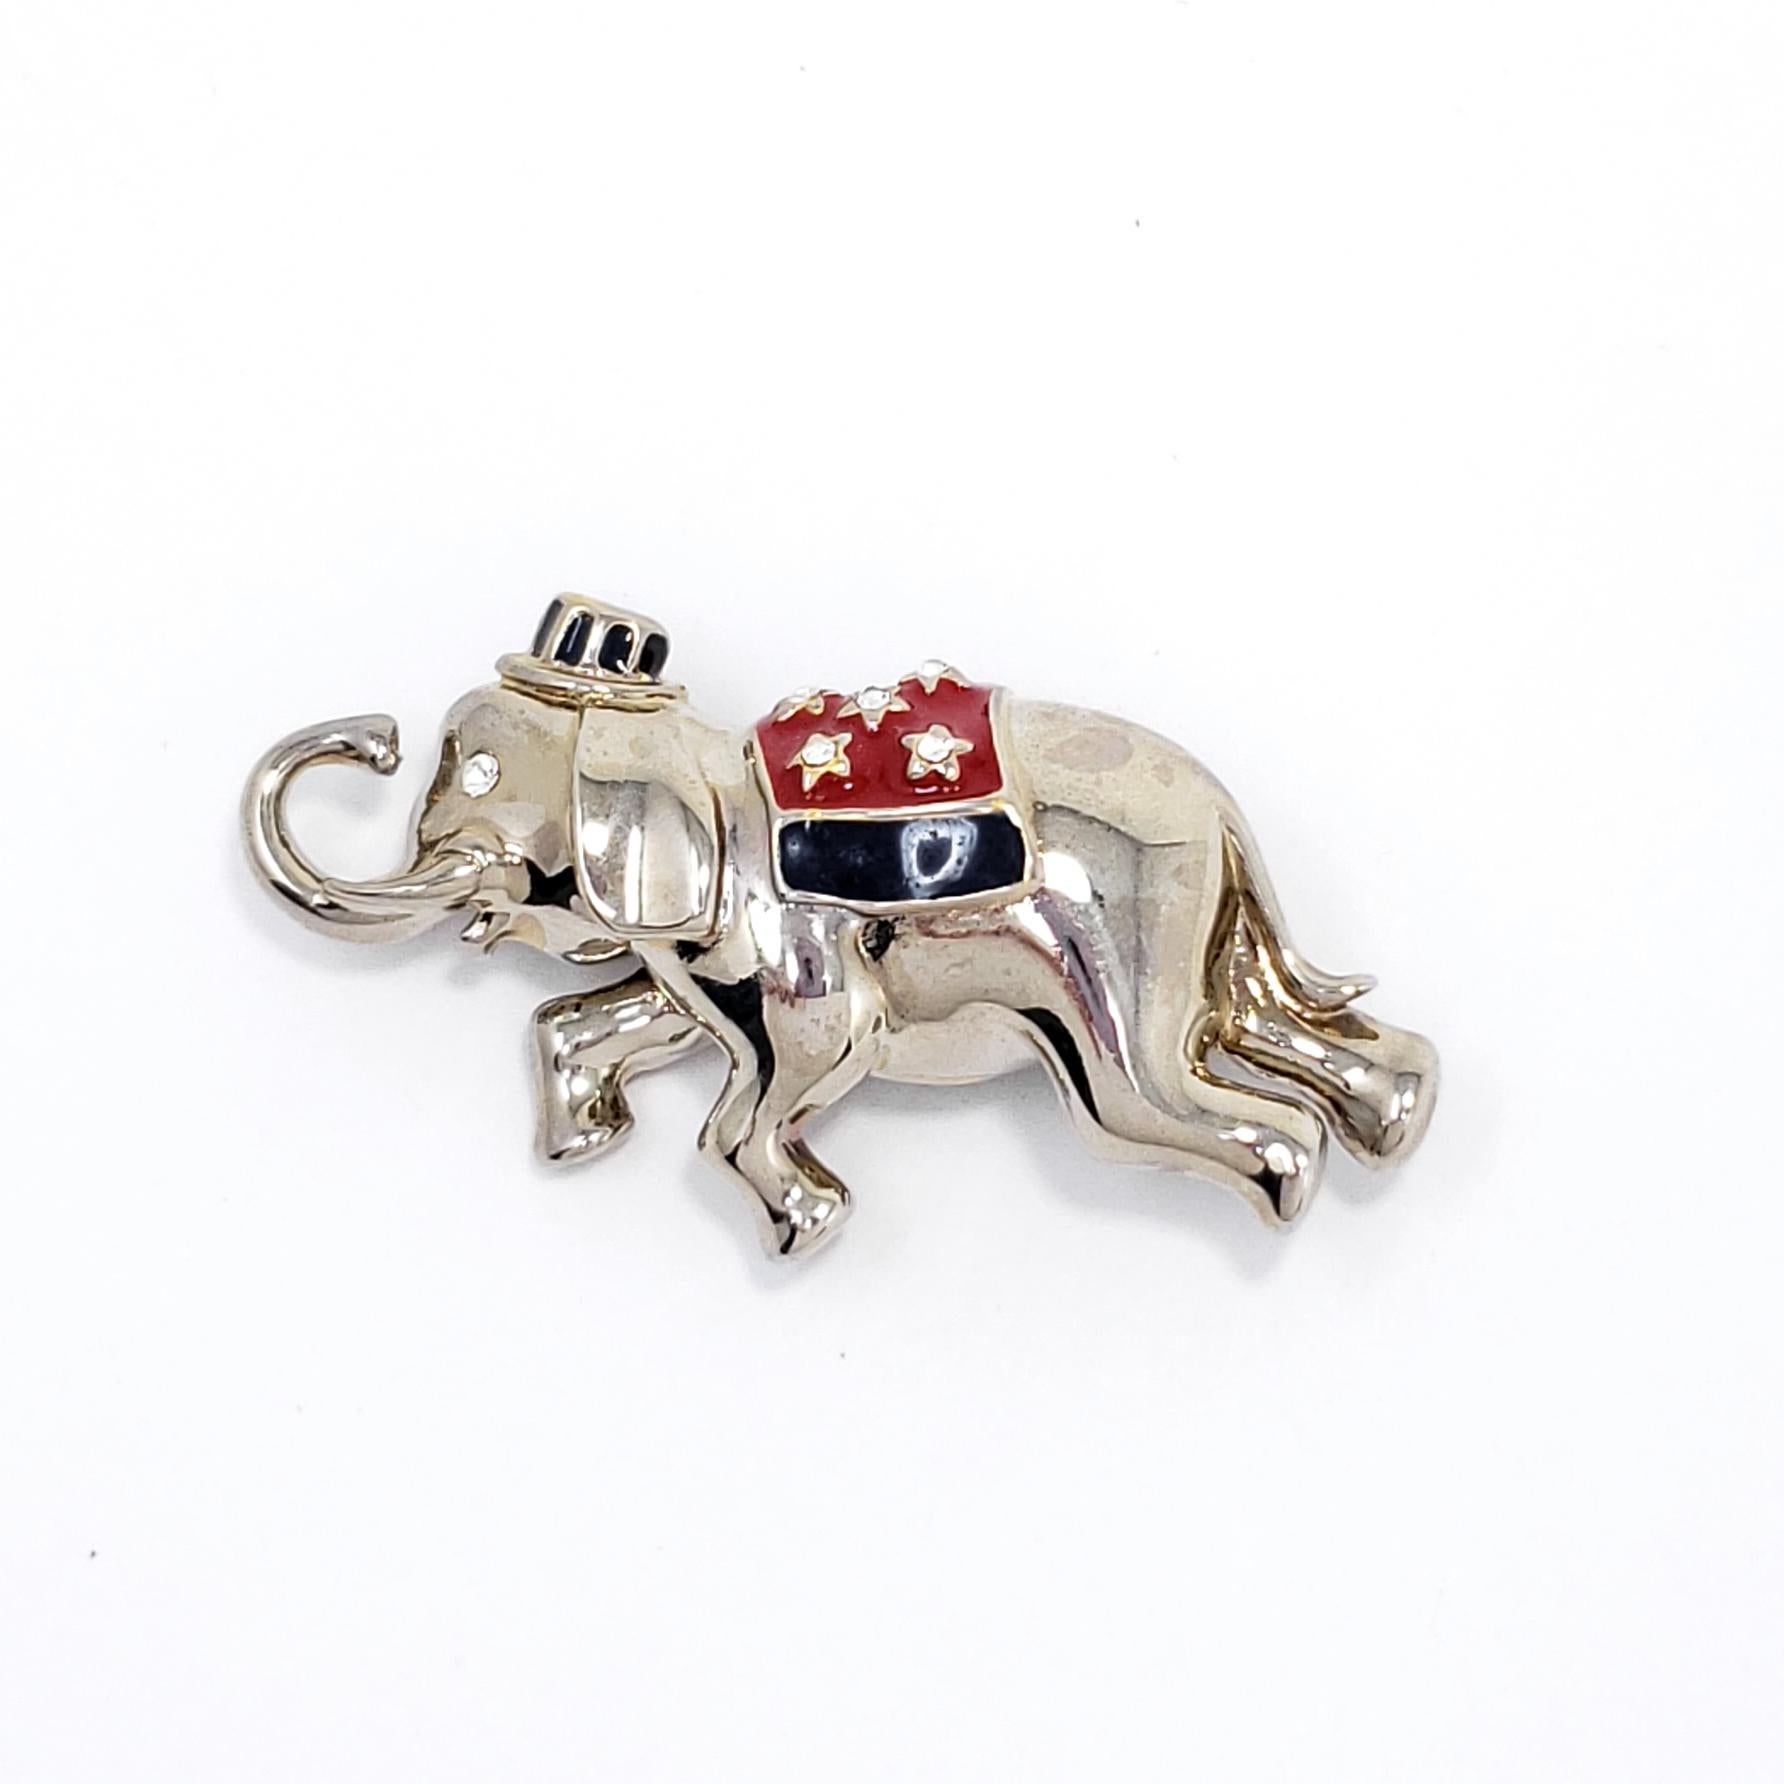 Round Cut Vintage Monet Republican Elephant Pin Brooch in Silver, Red and Blue Enamel For Sale